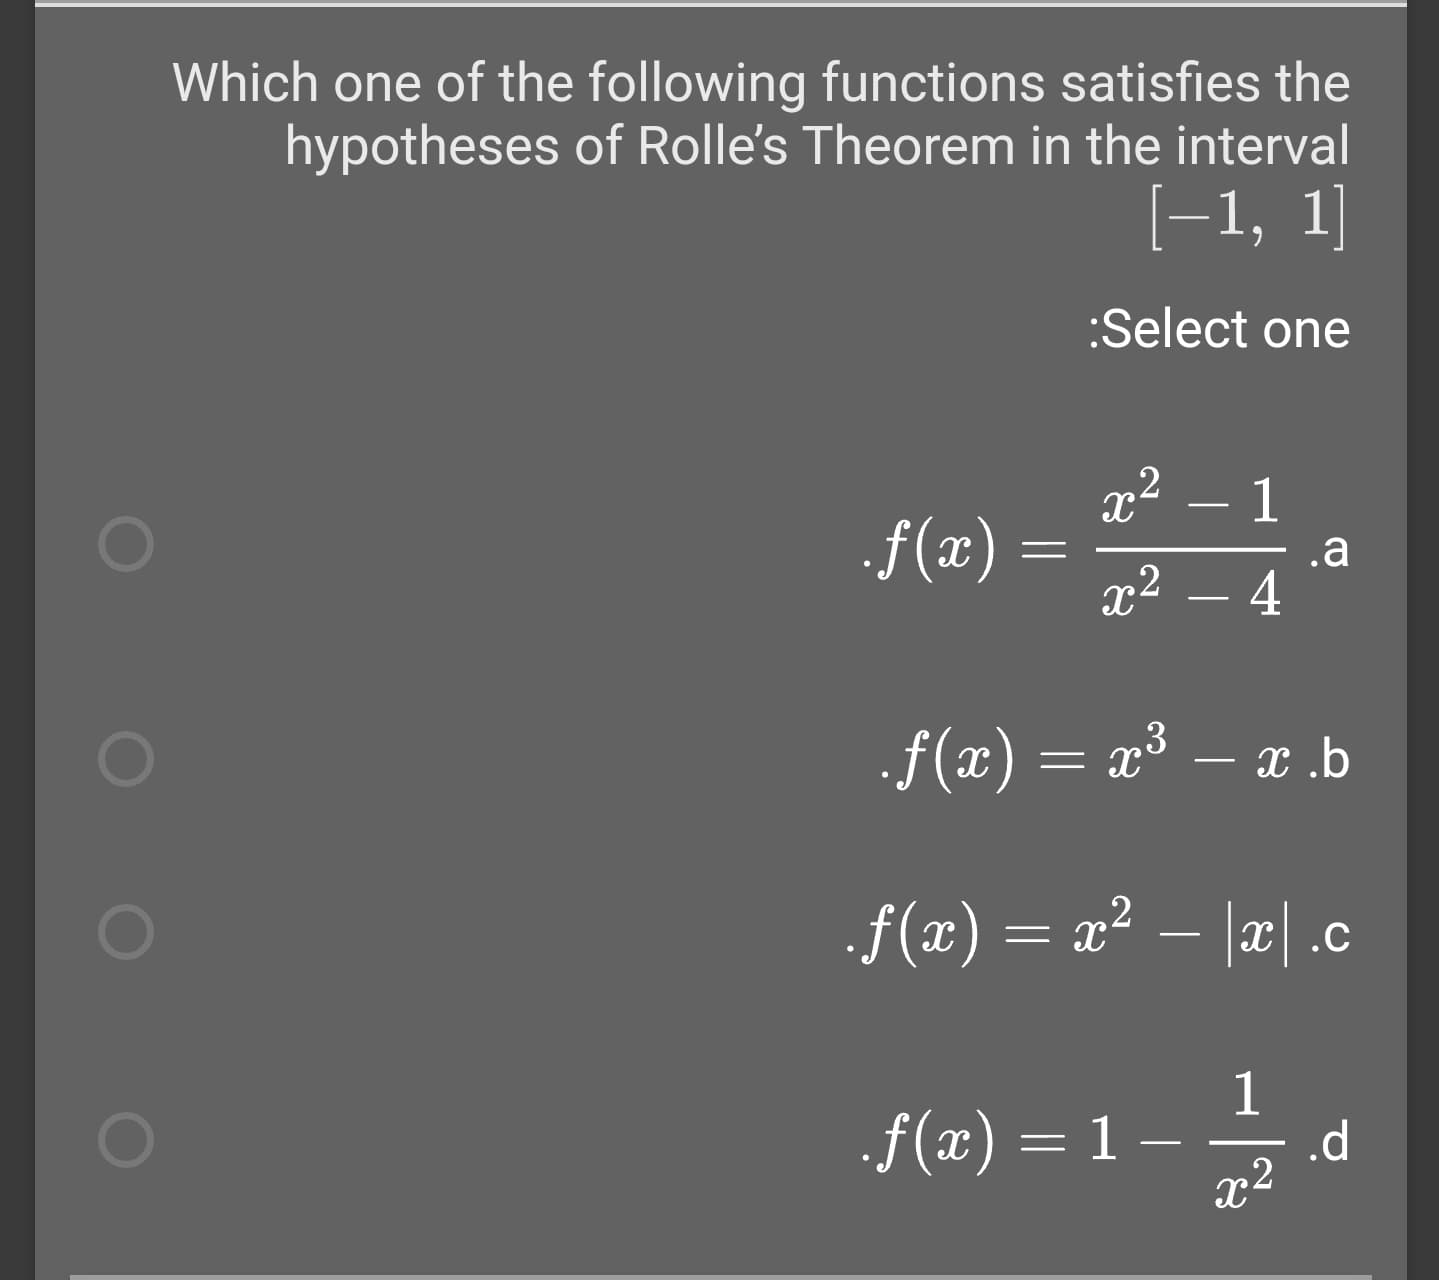 Which one of the following functions satisfies the
hypotheses of Rolle's Theorem in the interval
(-1, 1]
:Select one
x2
1
.f(x) =
x2
.a
f(x) = x³ – x .b
f(x) = x² – |x| .c
%3D
1
.d
x2
.f(x) = 1
4.
